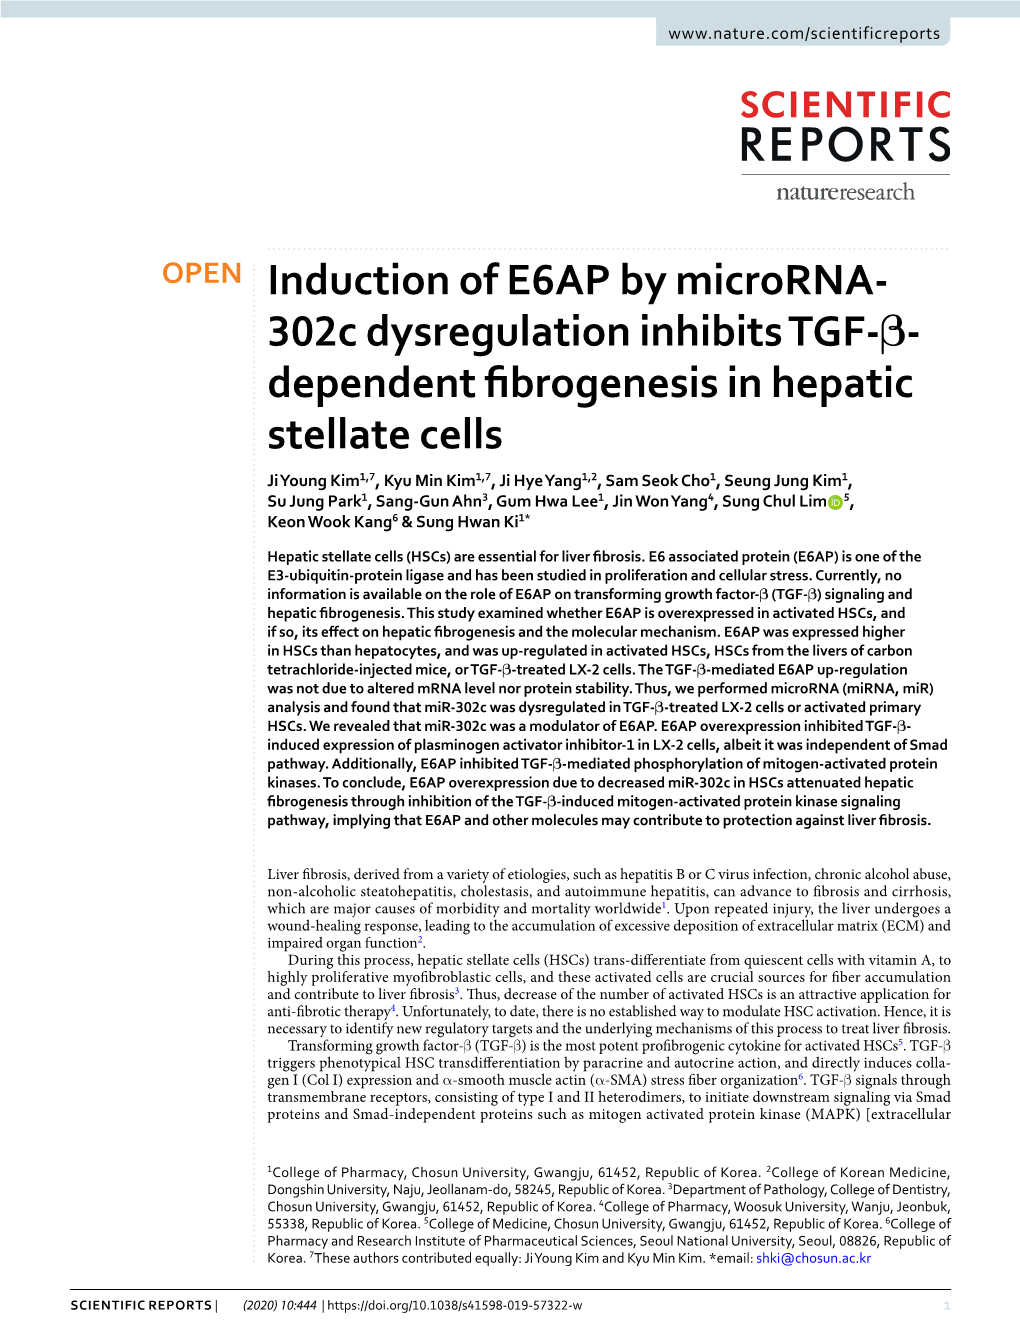 Induction of E6AP by Microrna-302C Dysregulation Inhibits